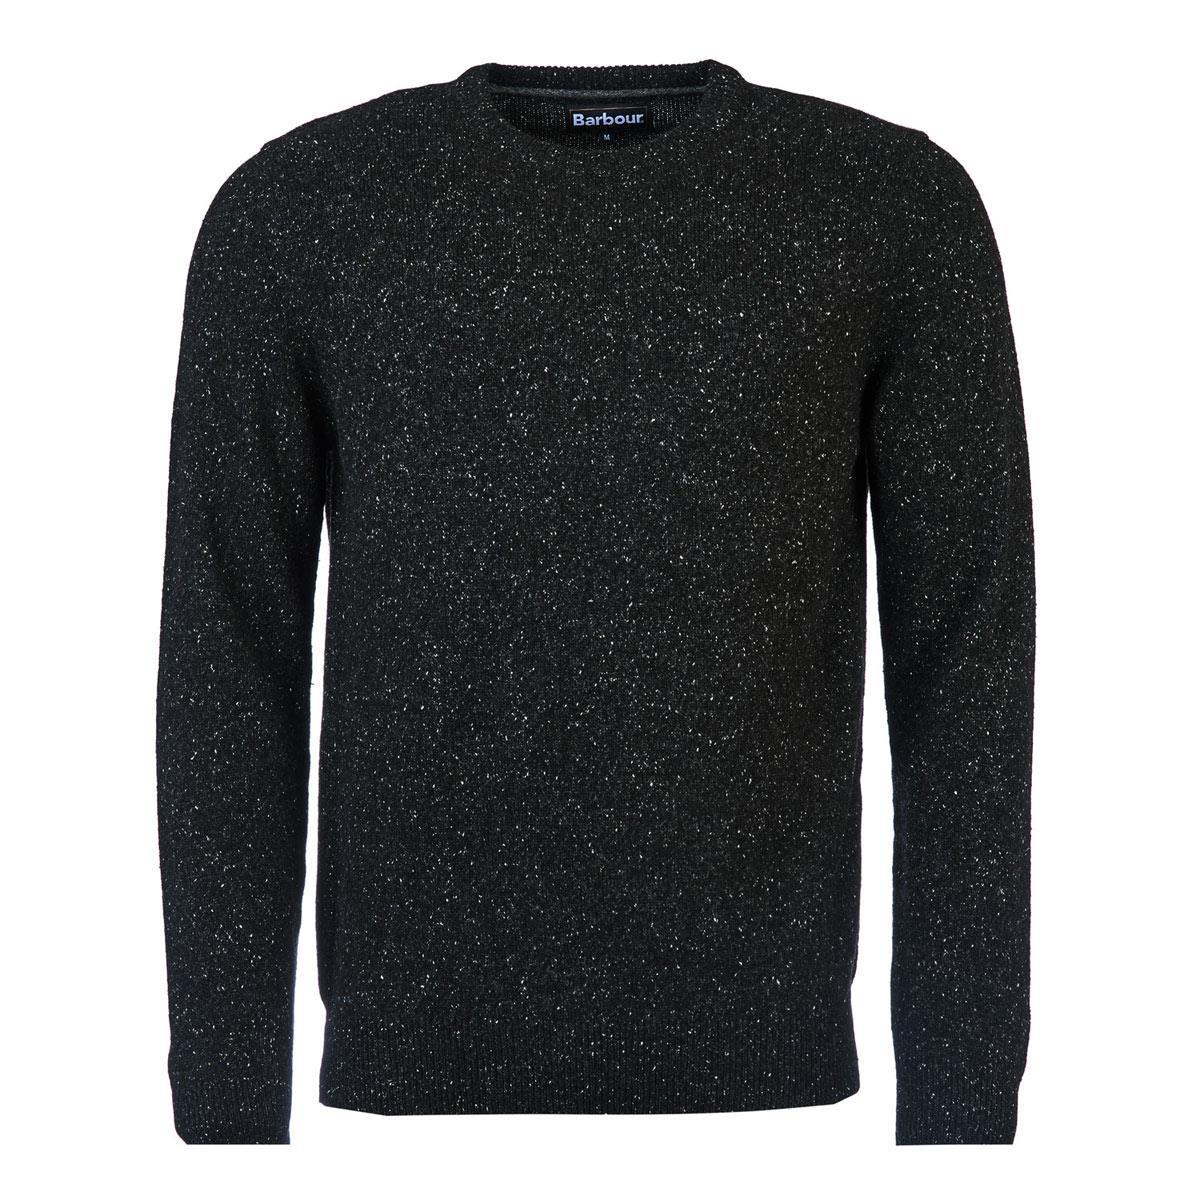 What are the features of the Barbour Tisbury sweater?